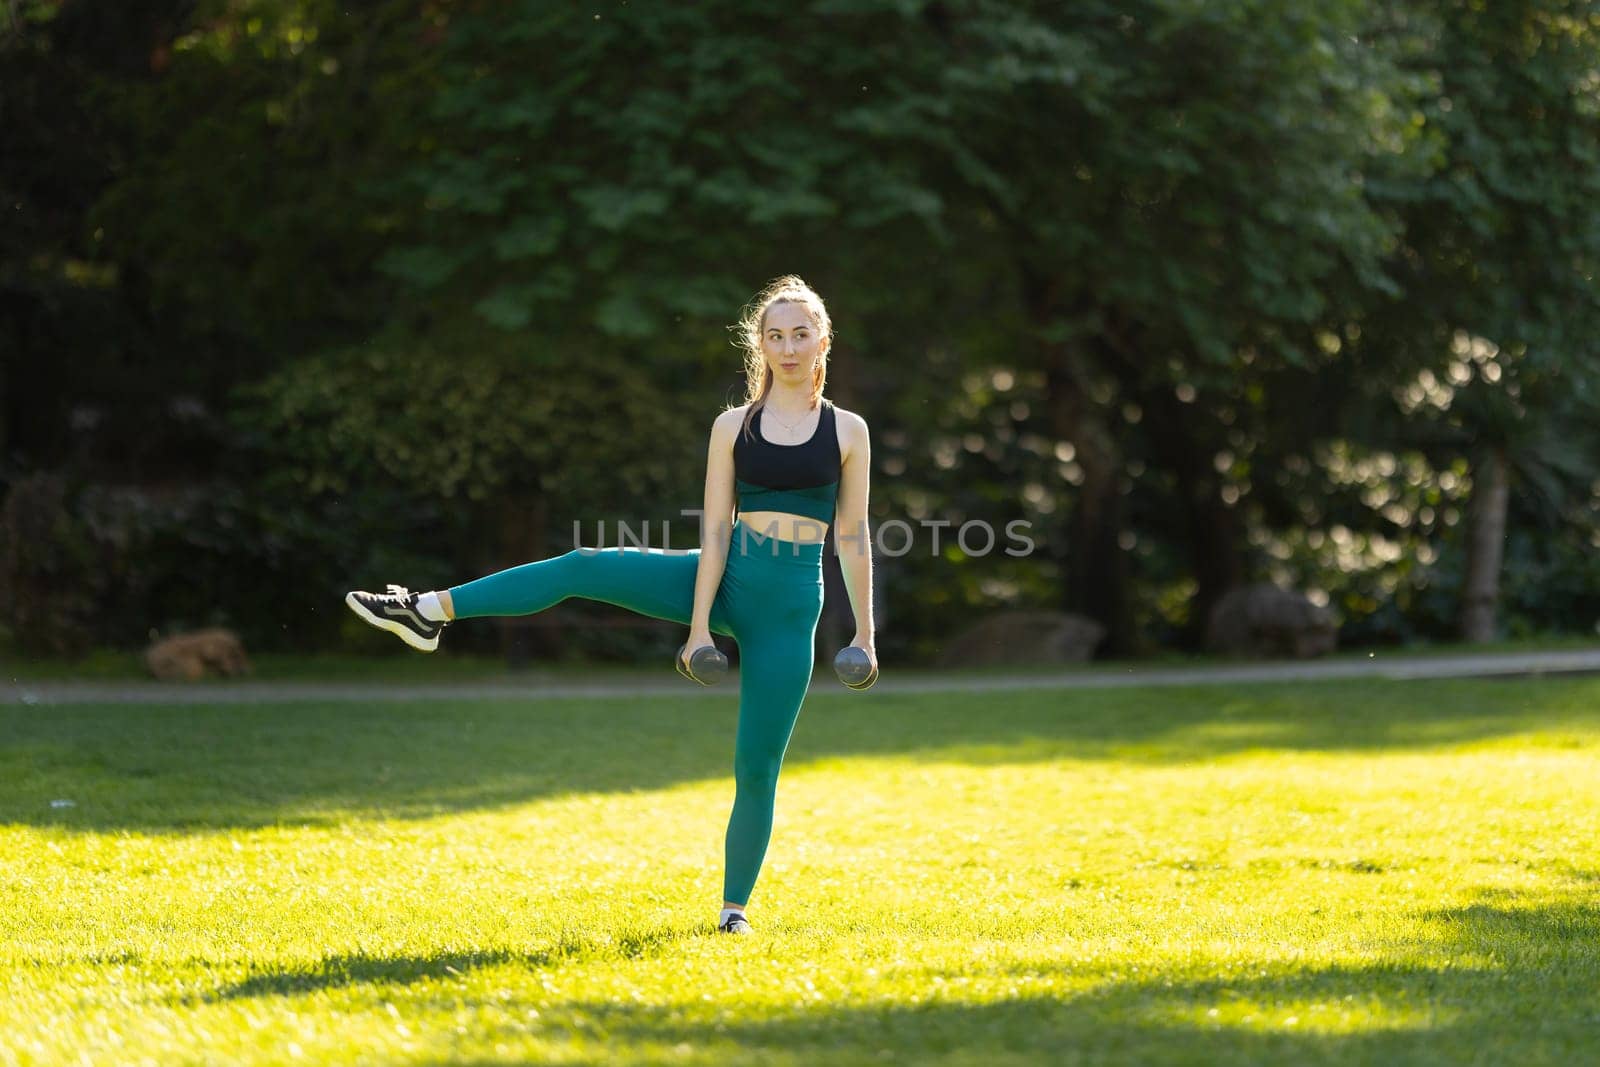 A woman is doing a leg lift in a park. She is wearing a black tank top and green leggings